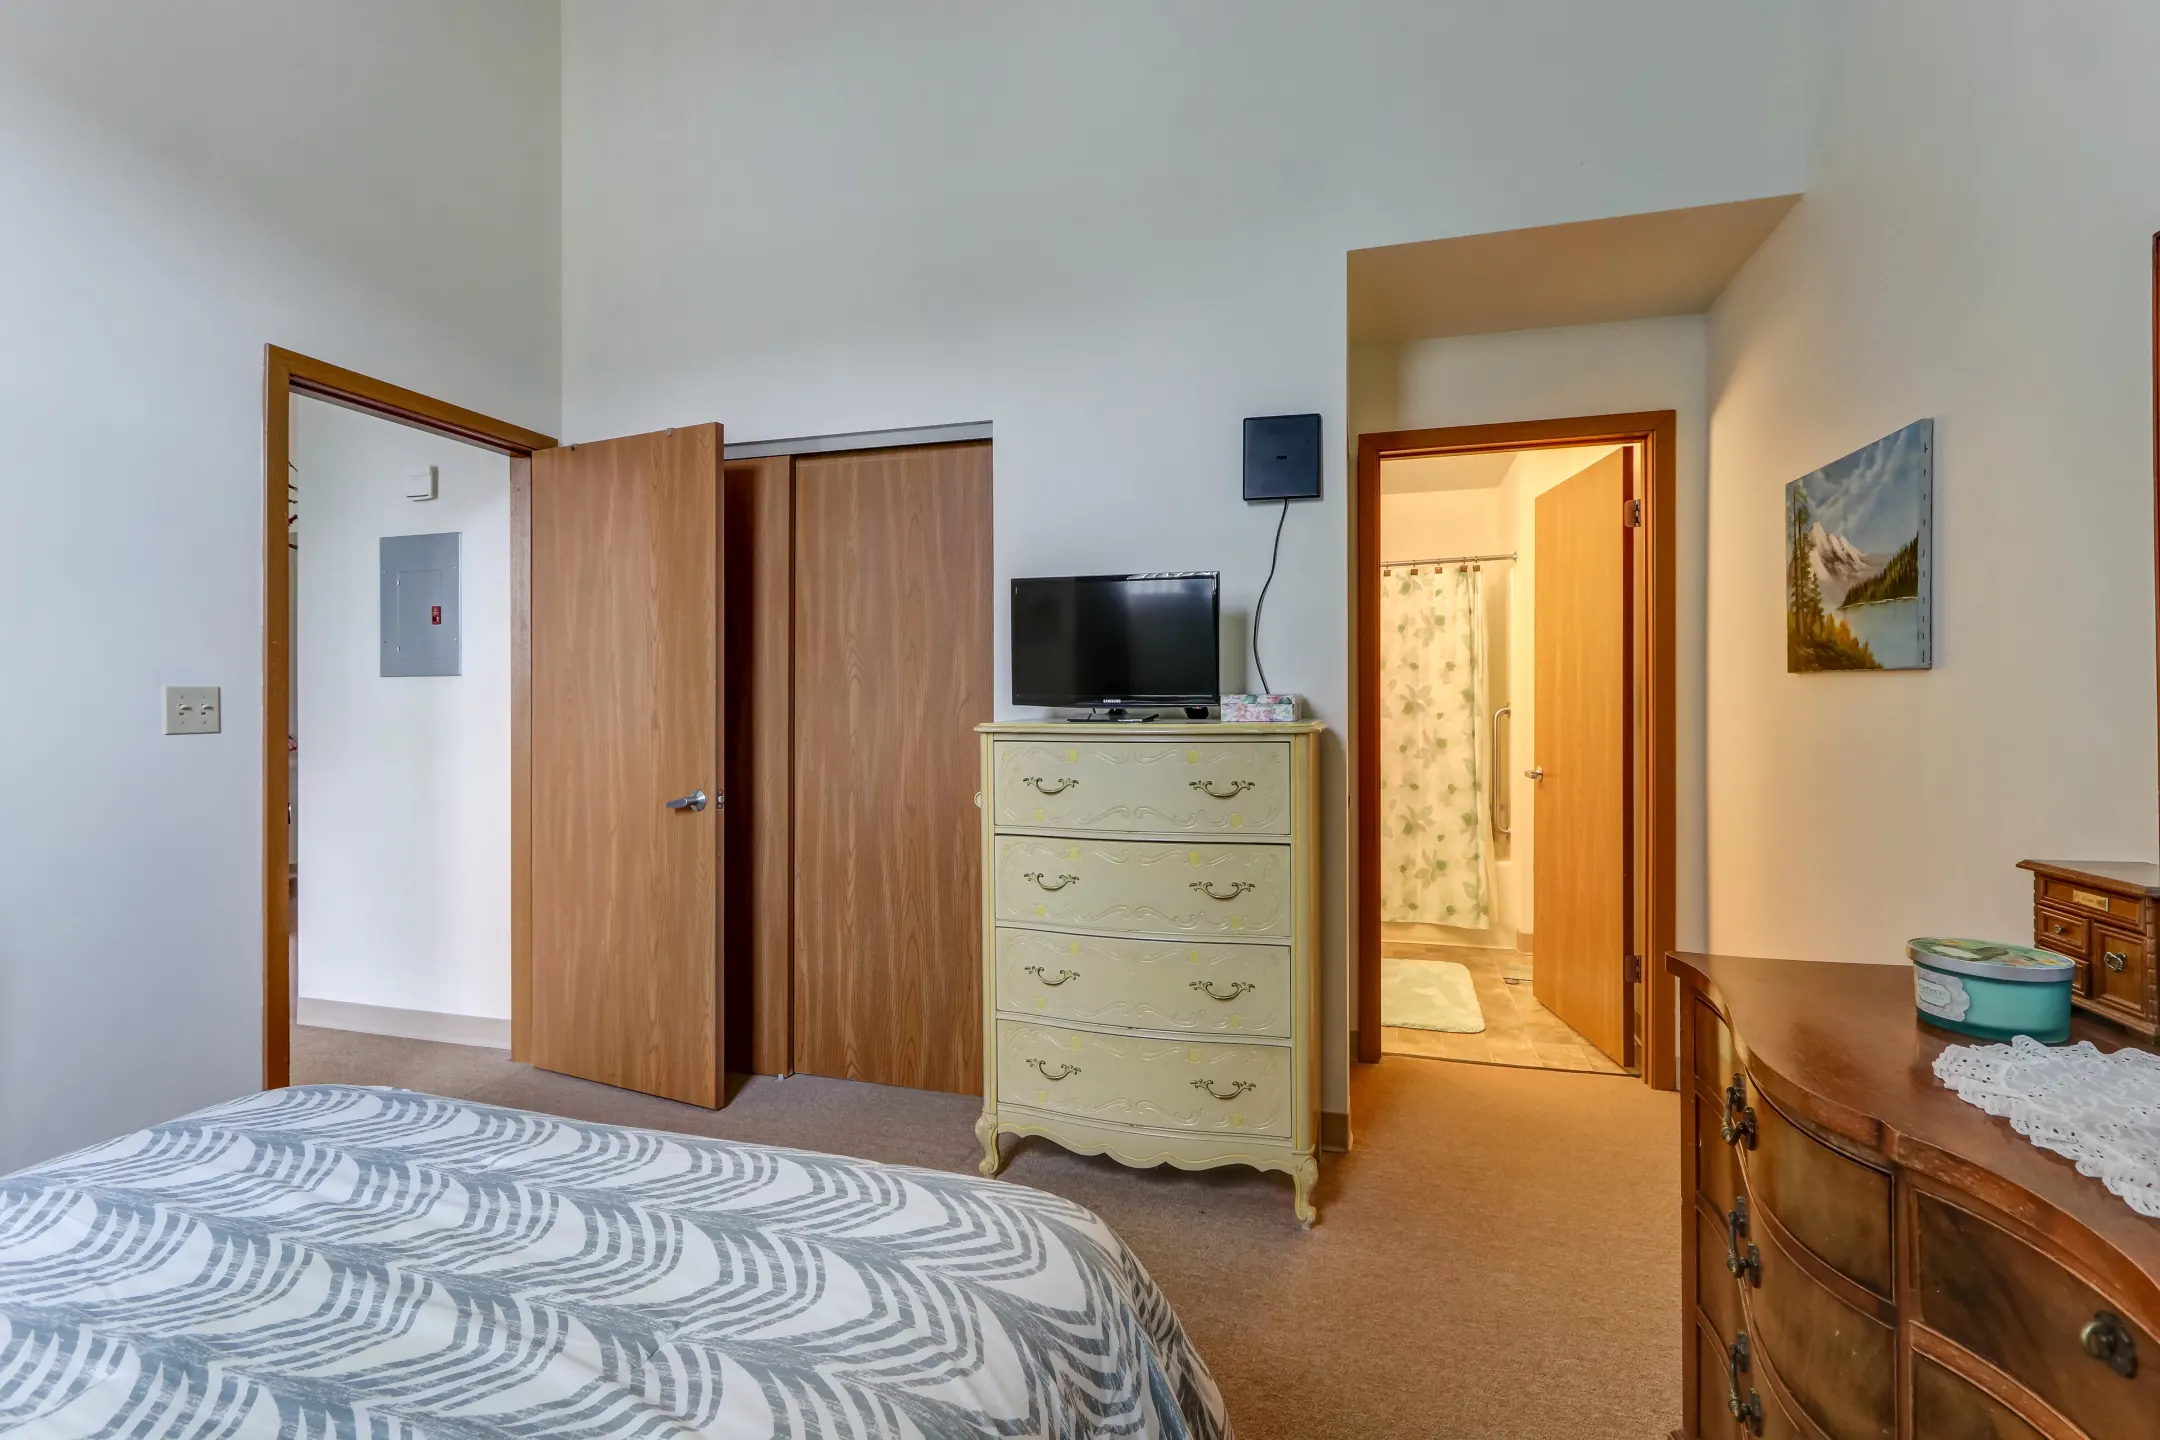 Bedroom - Etna Commons - Pittsburgh, PA